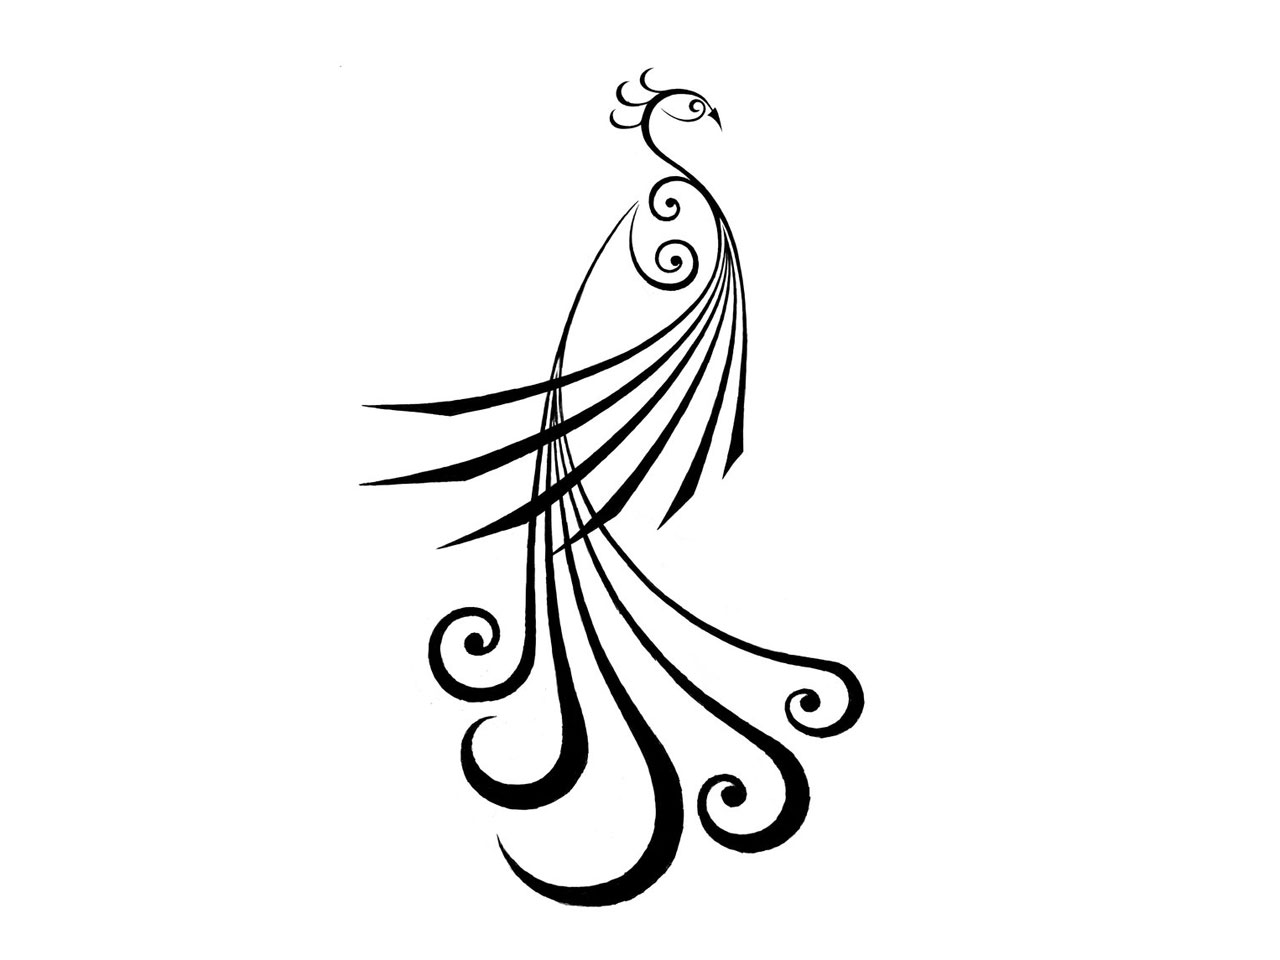 Free Peacock Feather Clipart Black And White, Download Free Peacock